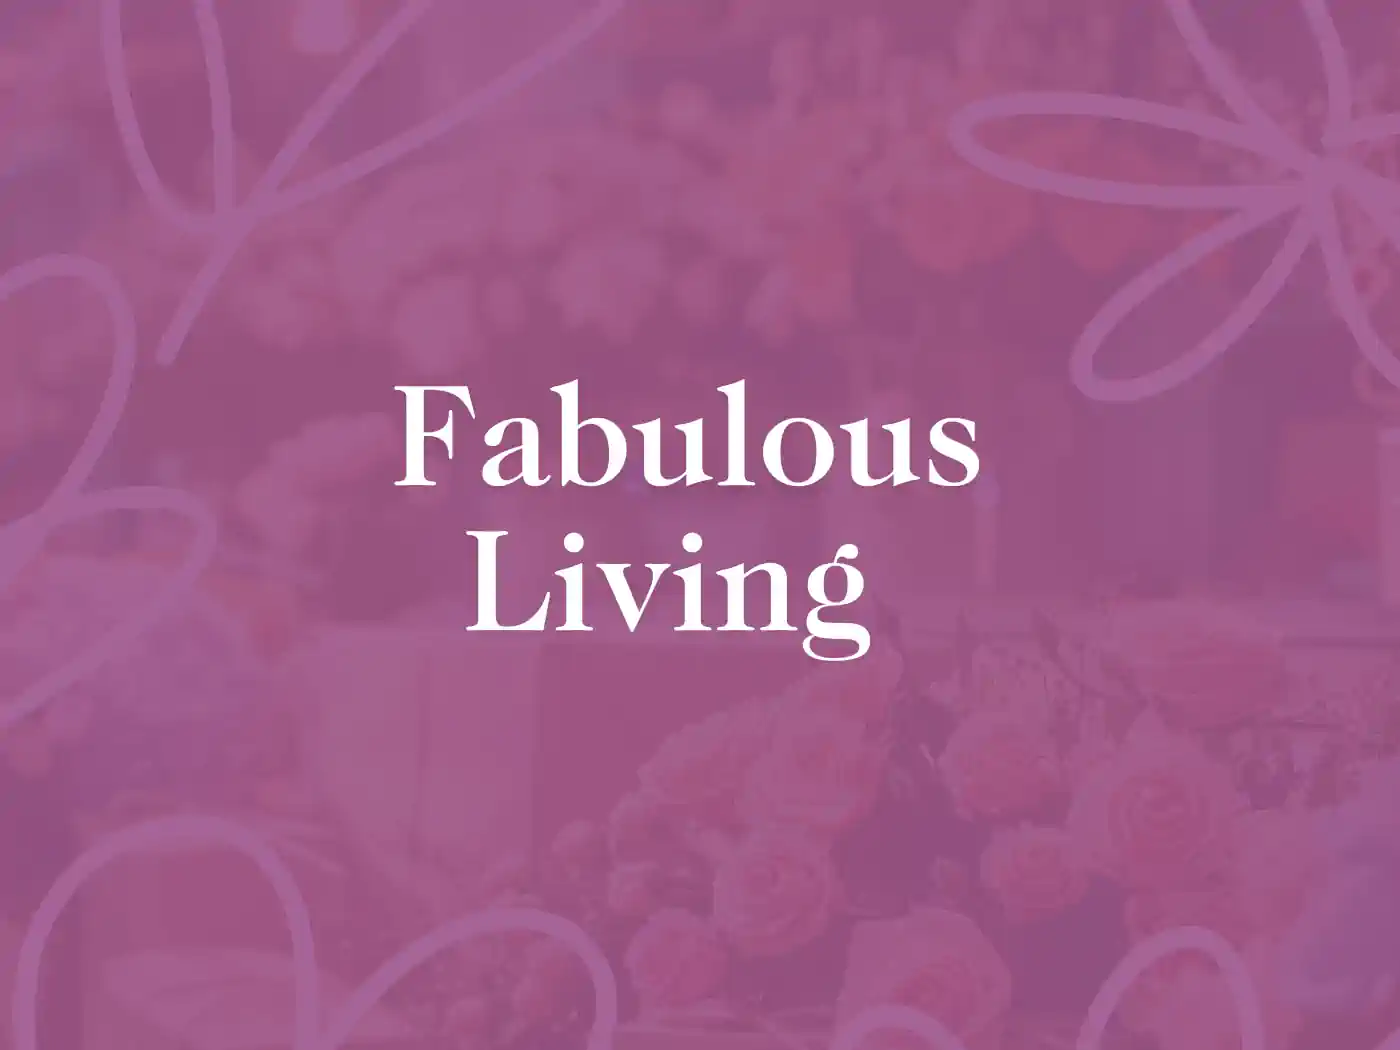 A decorative background with the text "Fabulous Living" in white font. Fabulous Flowers and Gifts - Fabulous Living Collection.